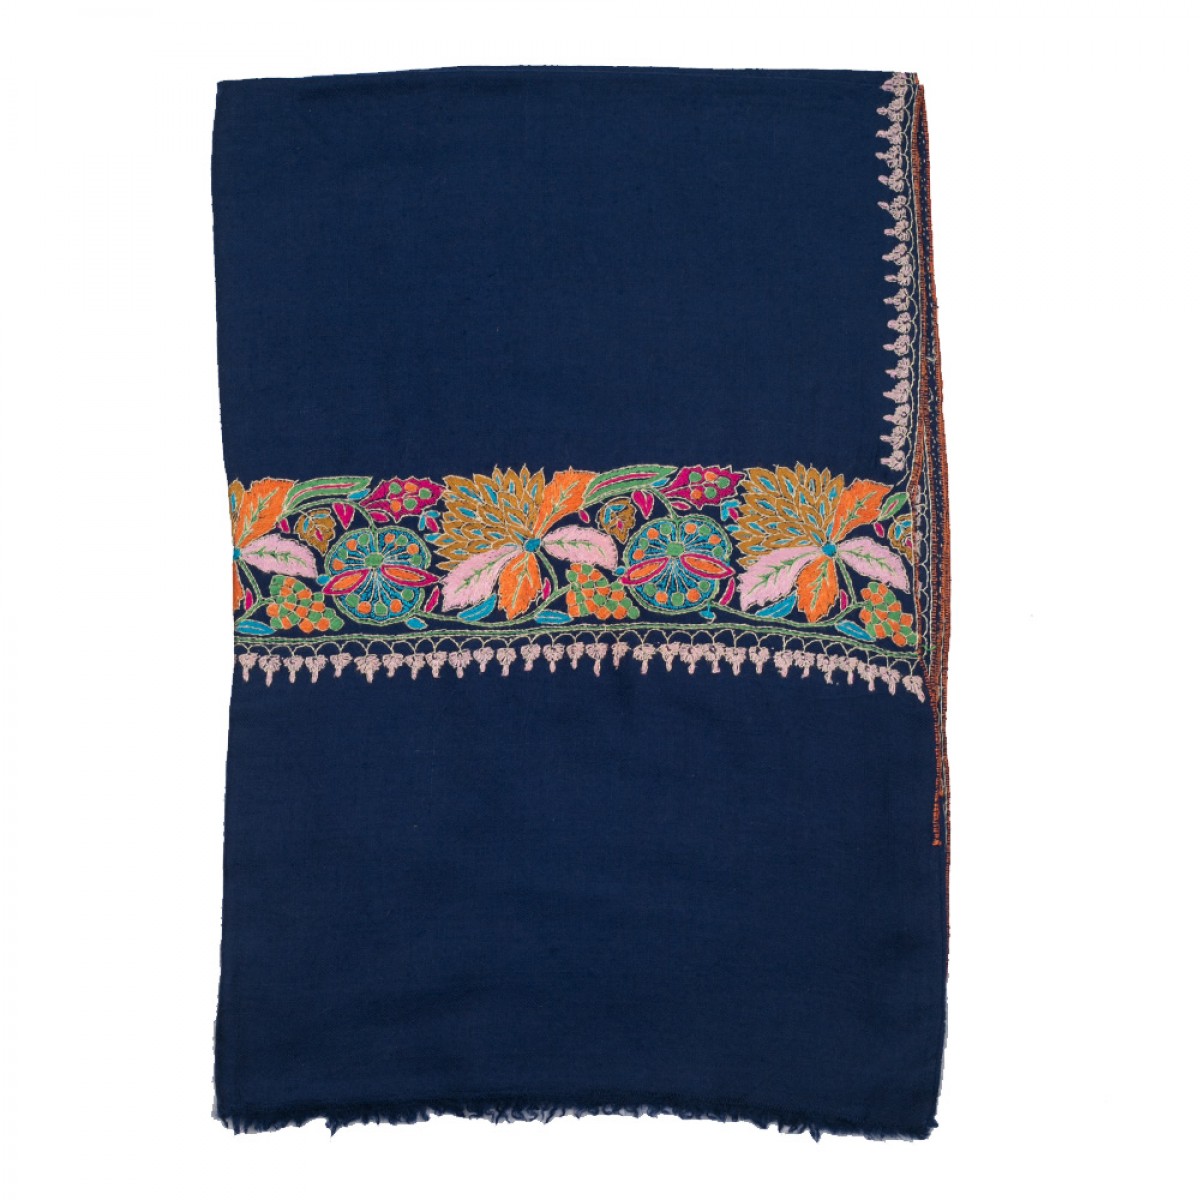 Embroidered Pashmina Stole - Deep Blue